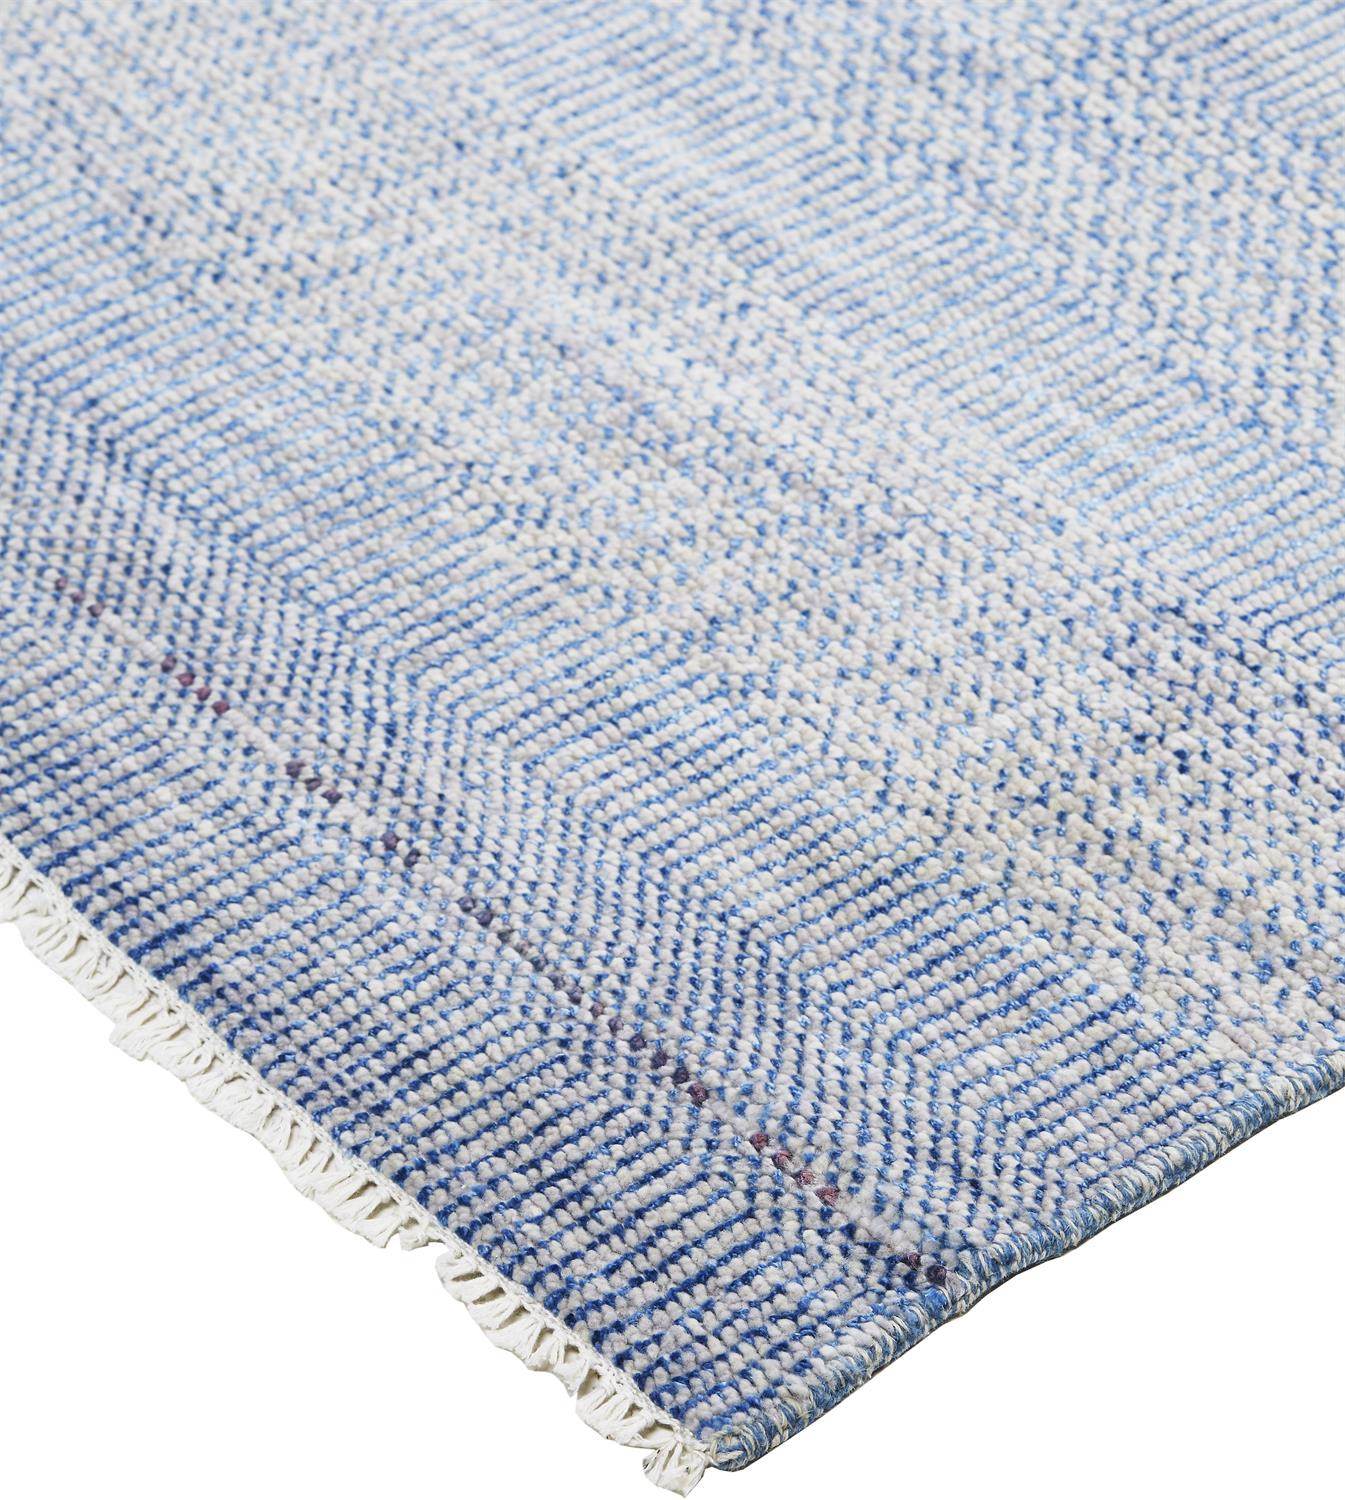 2' X 3' Blue And Silver Wool Striped Hand Knotted Area Rug-513851-2